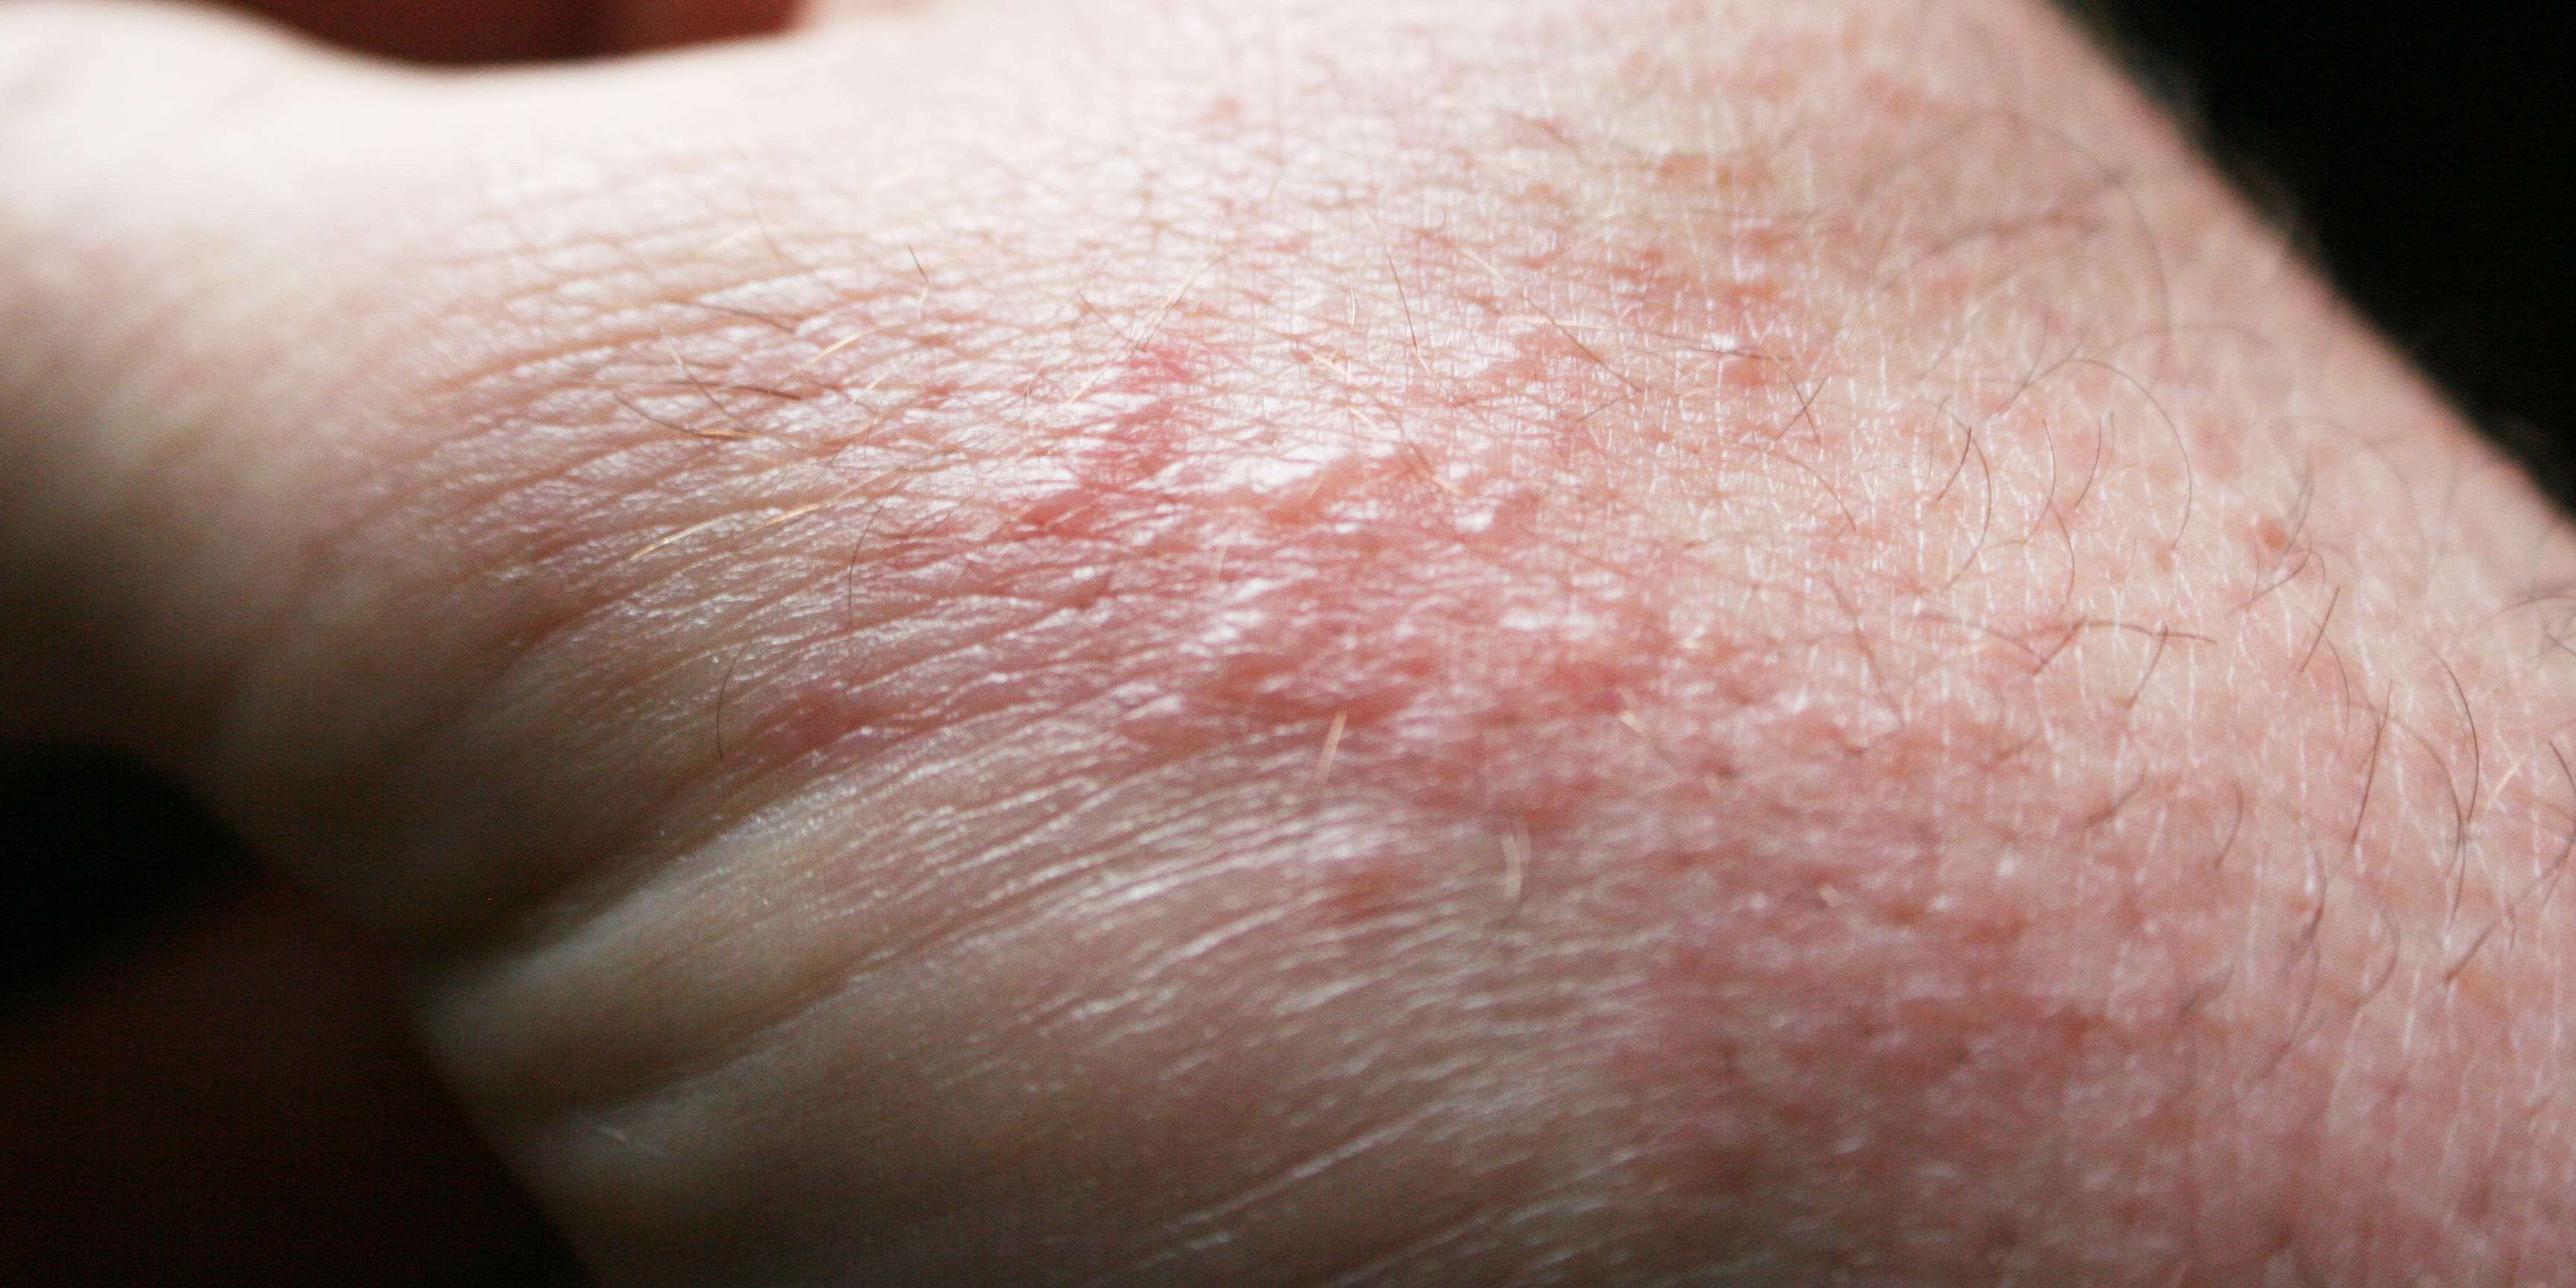 How to tell if you have a poison oak rash and how to treat it